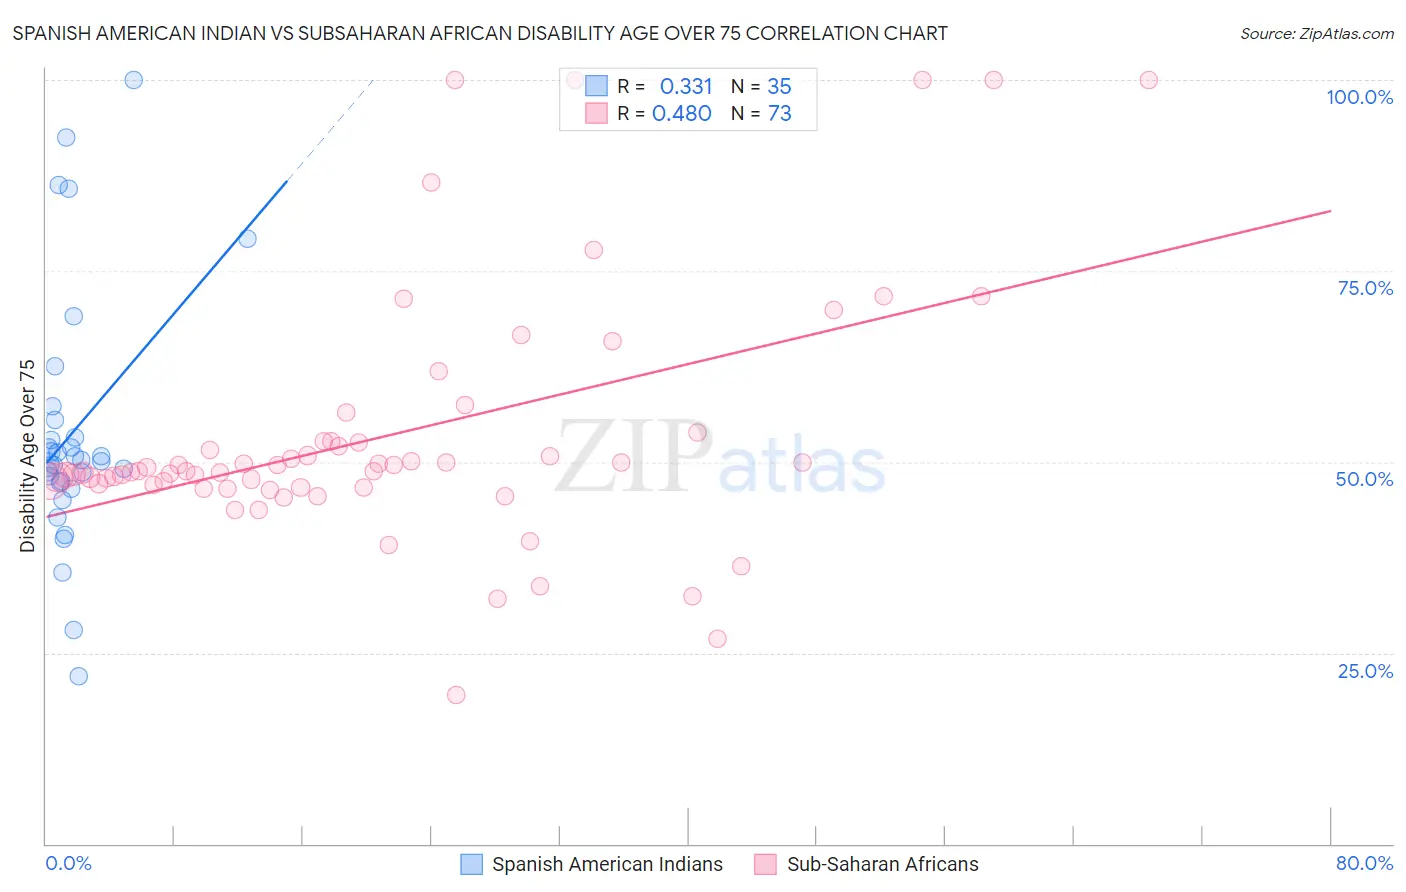 Spanish American Indian vs Subsaharan African Disability Age Over 75